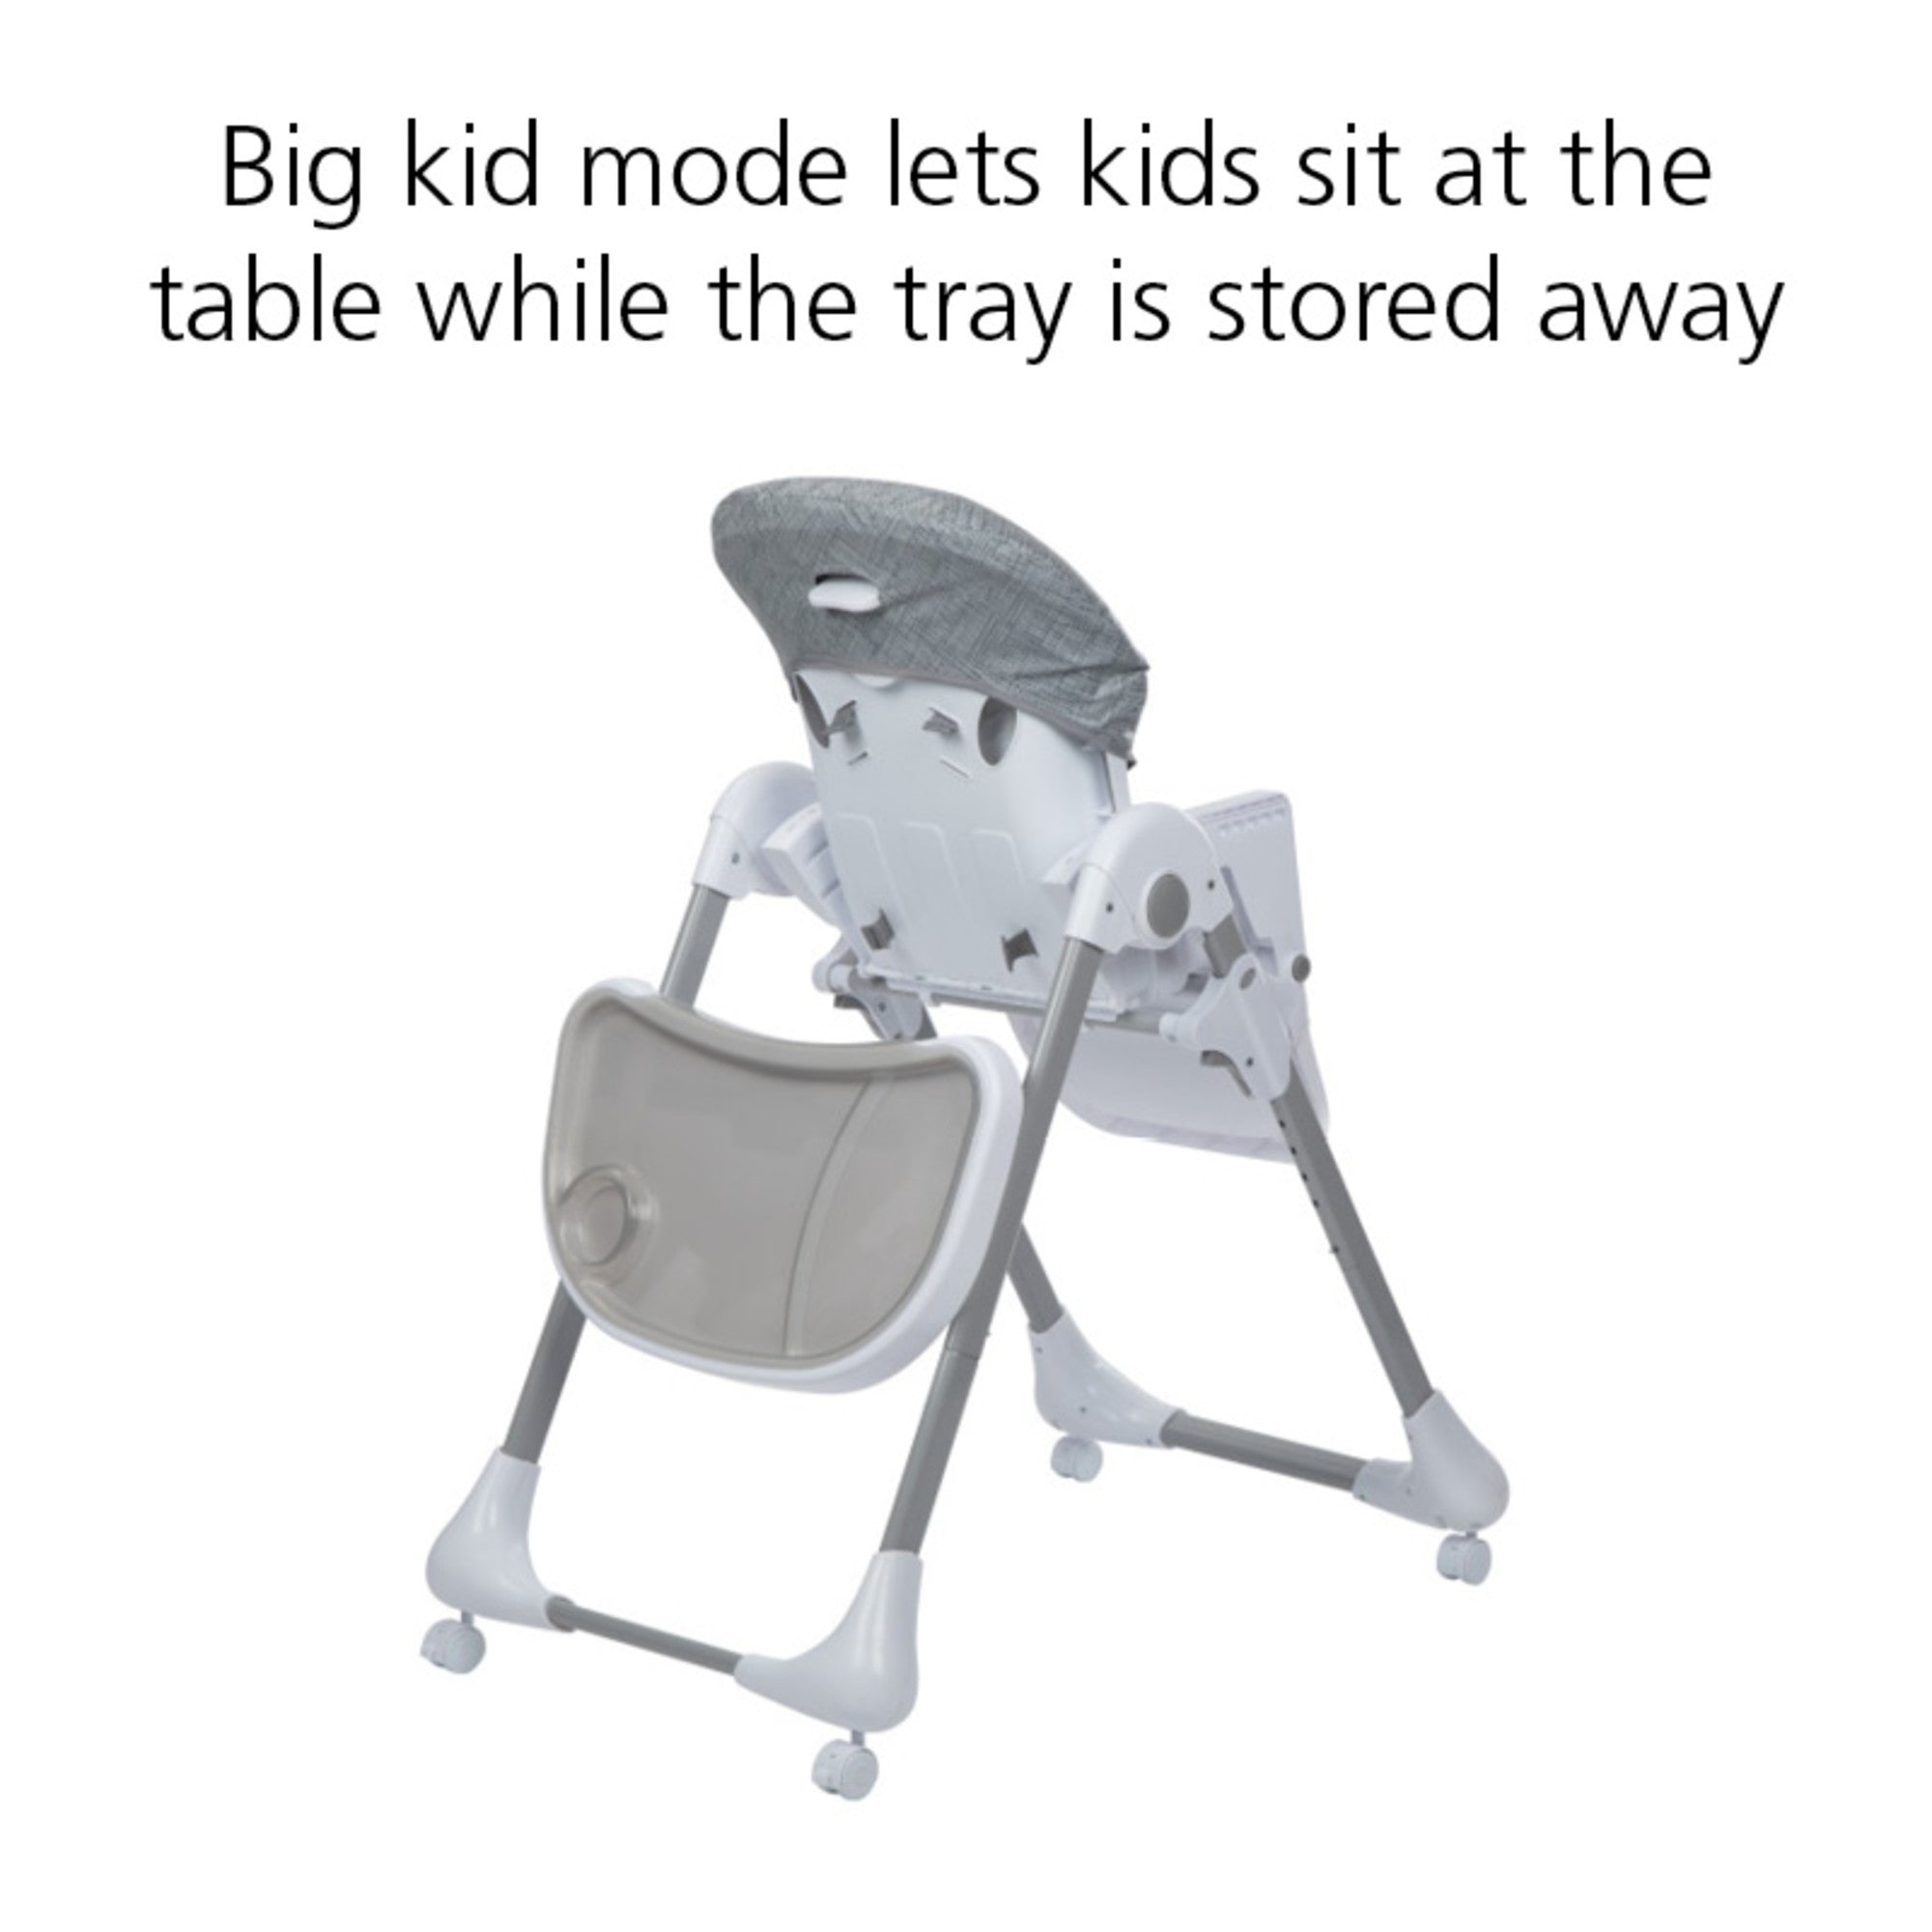 Big kid mode lets kids sit at the table while the tray is stored away